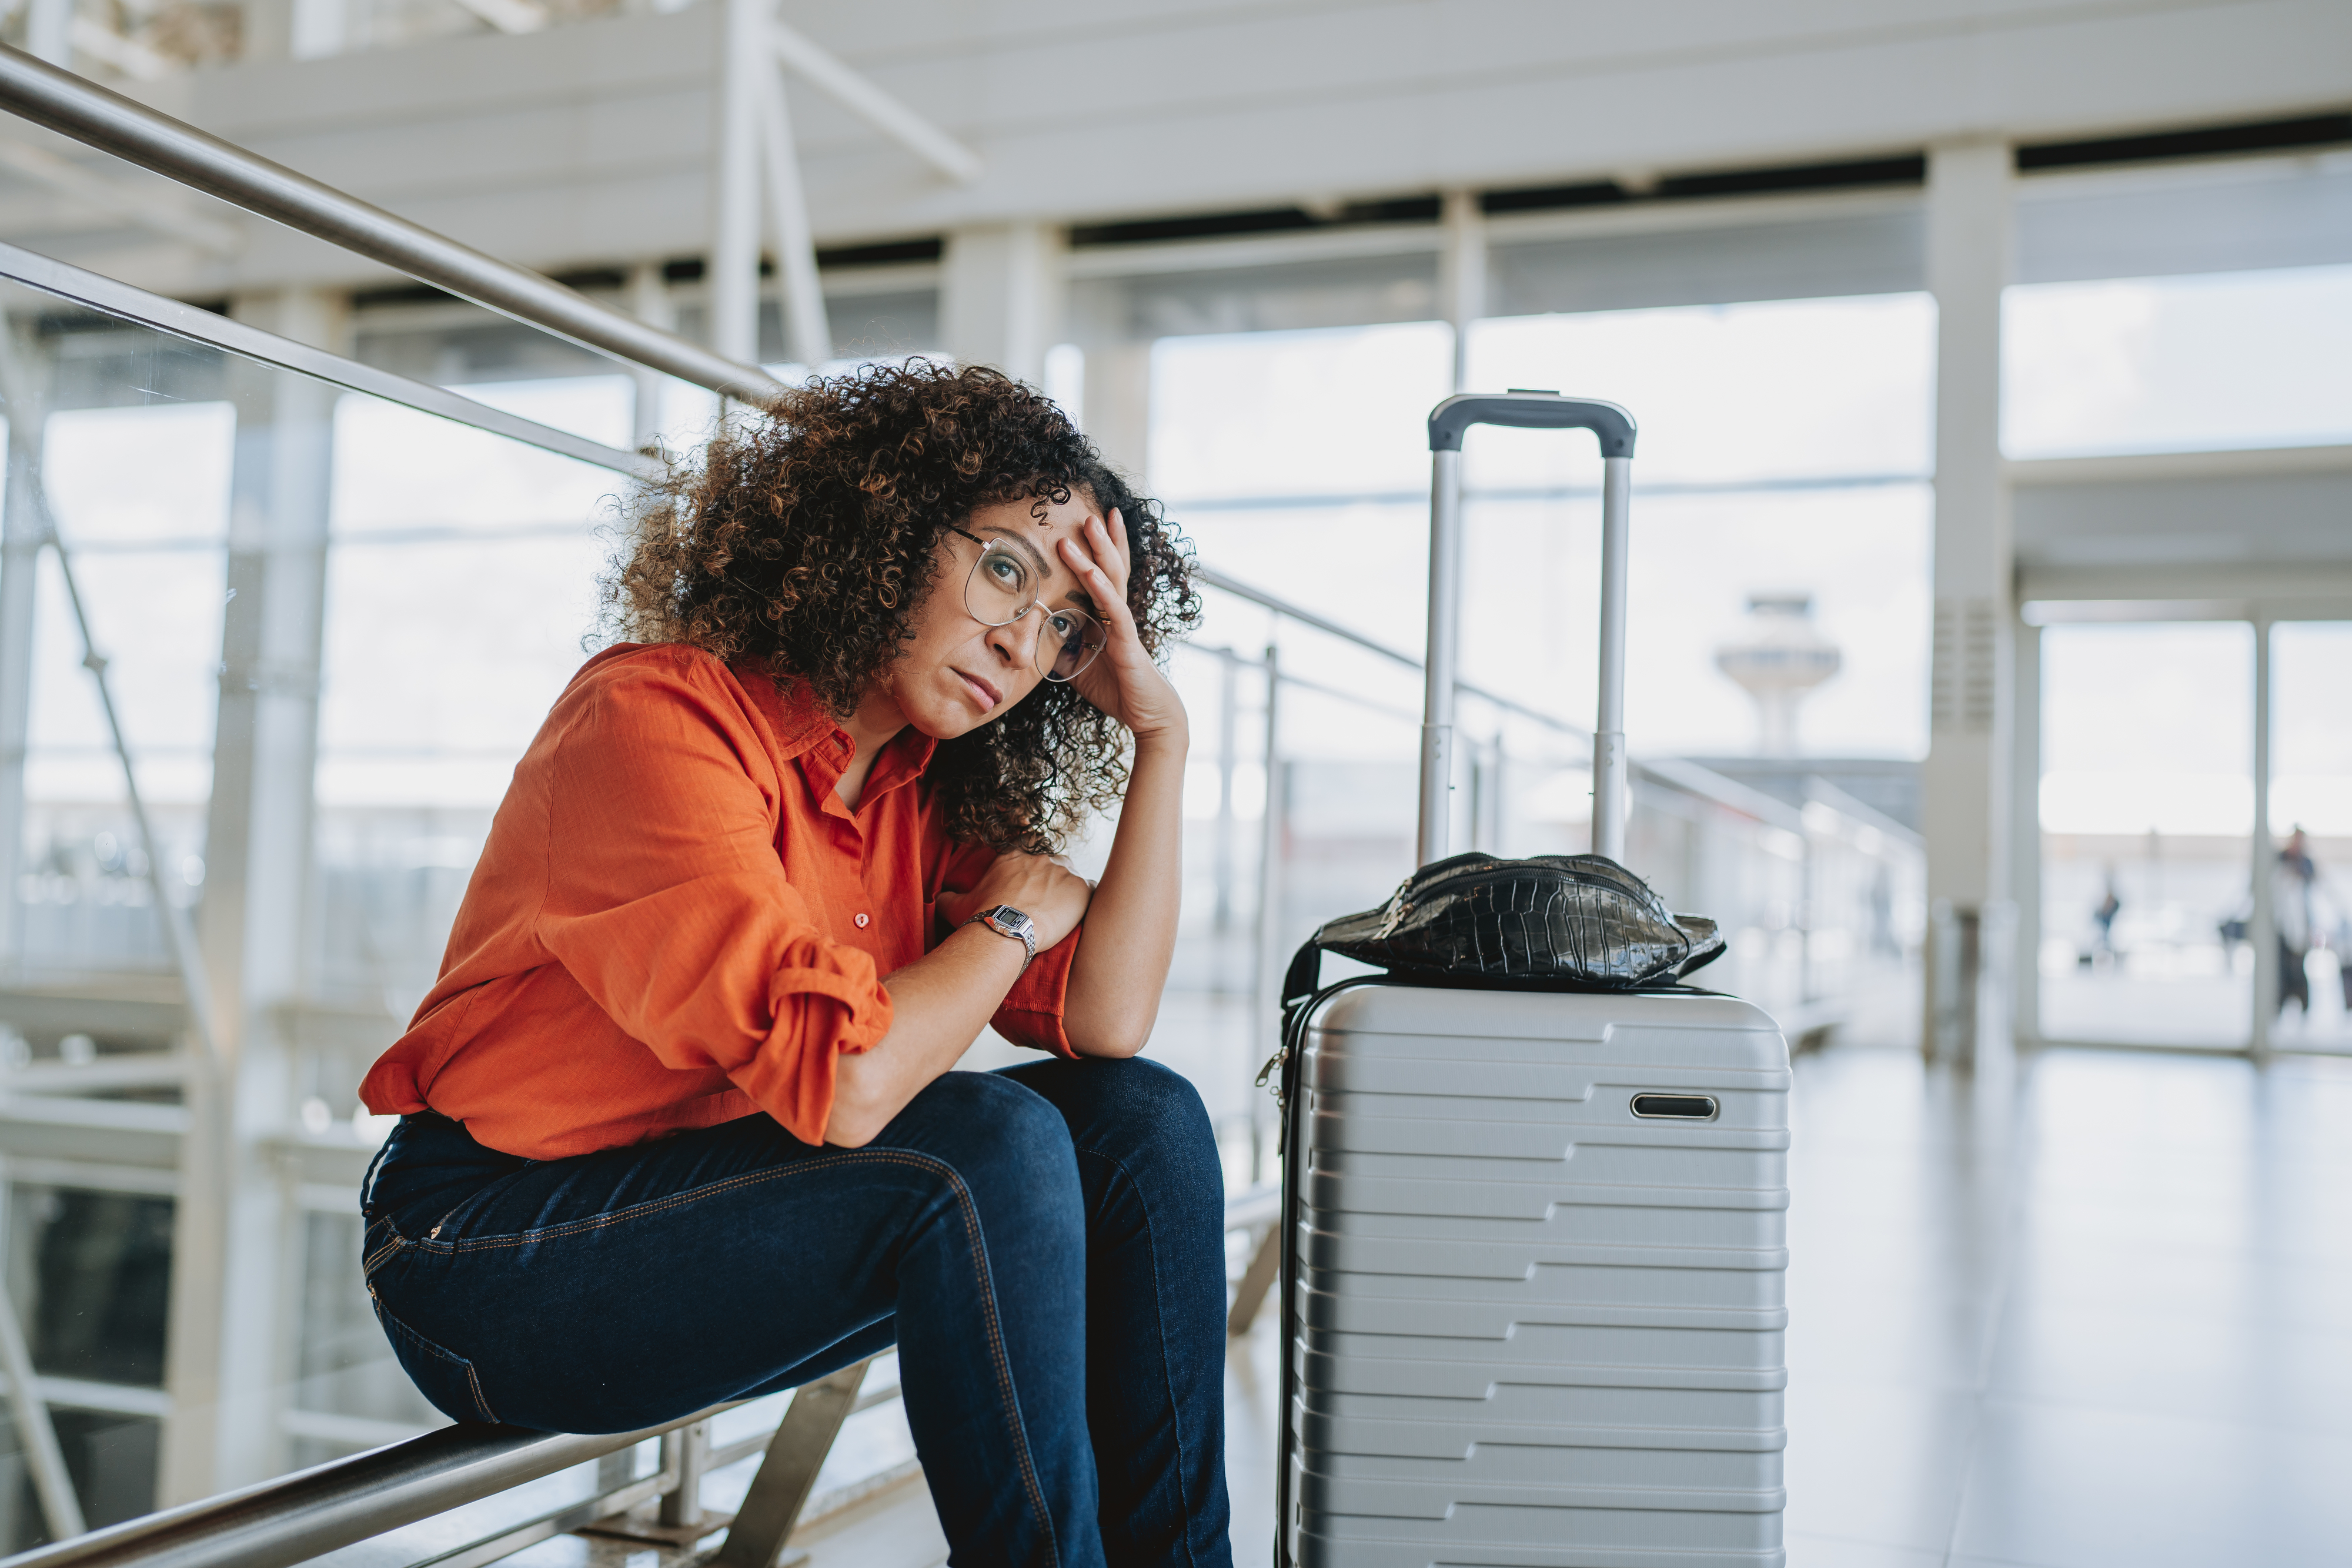 Woman sitting with suitcase in airport, looking distressed, possibly due to travel issues